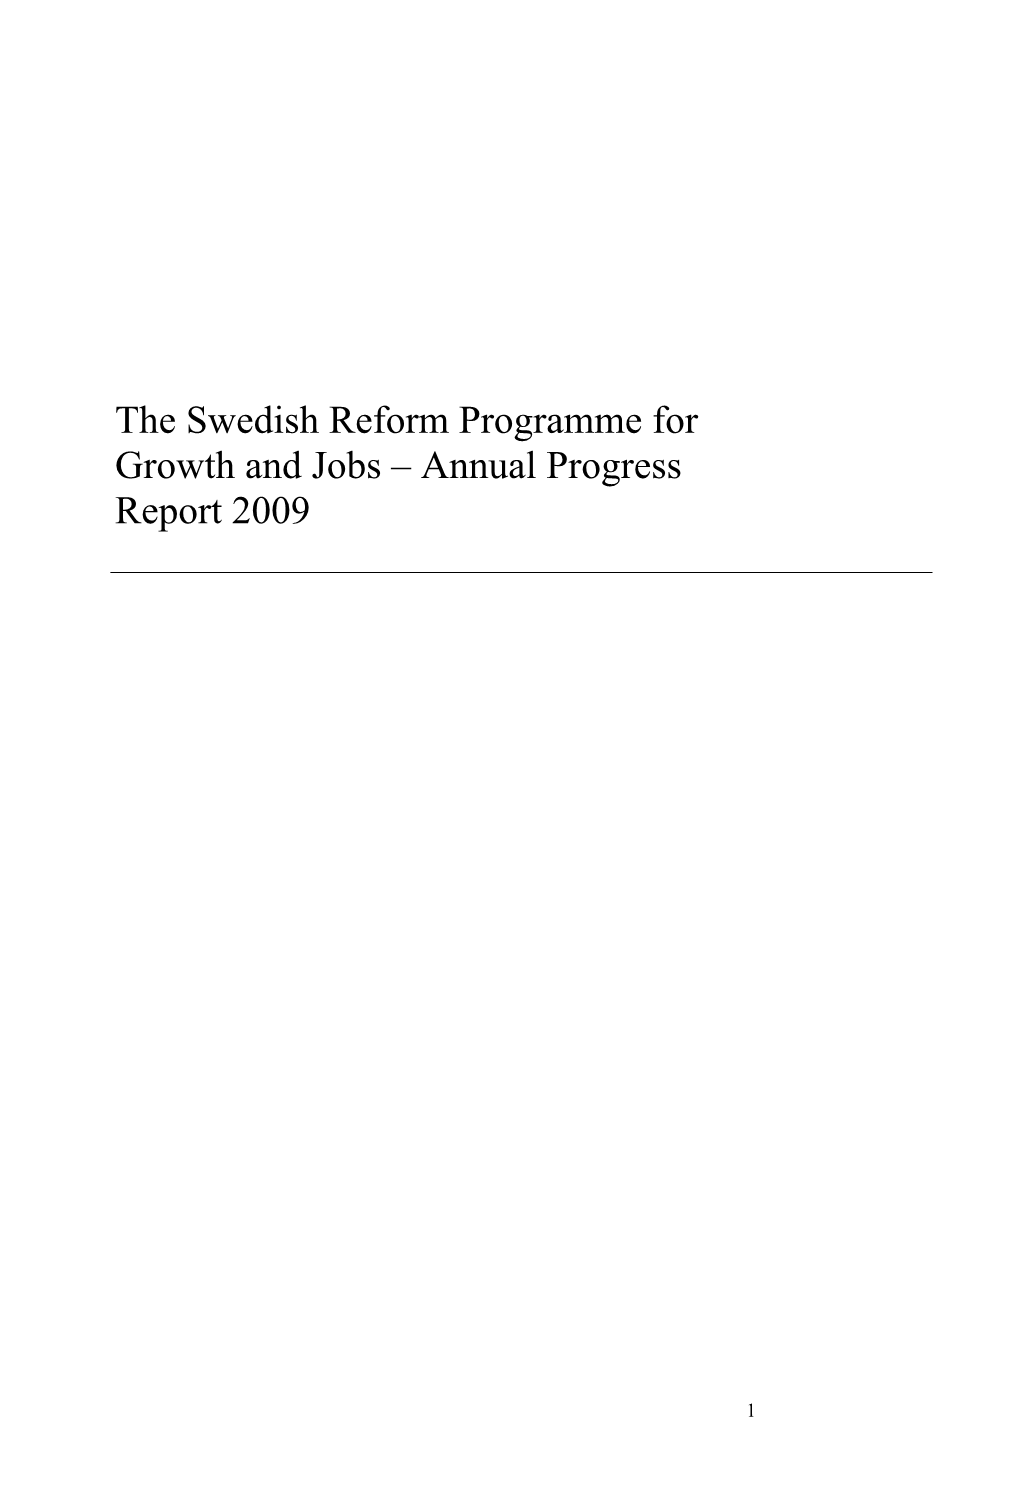 The Swedish Reform Programme for Growth and Jobs – Annual Progress Report 2009